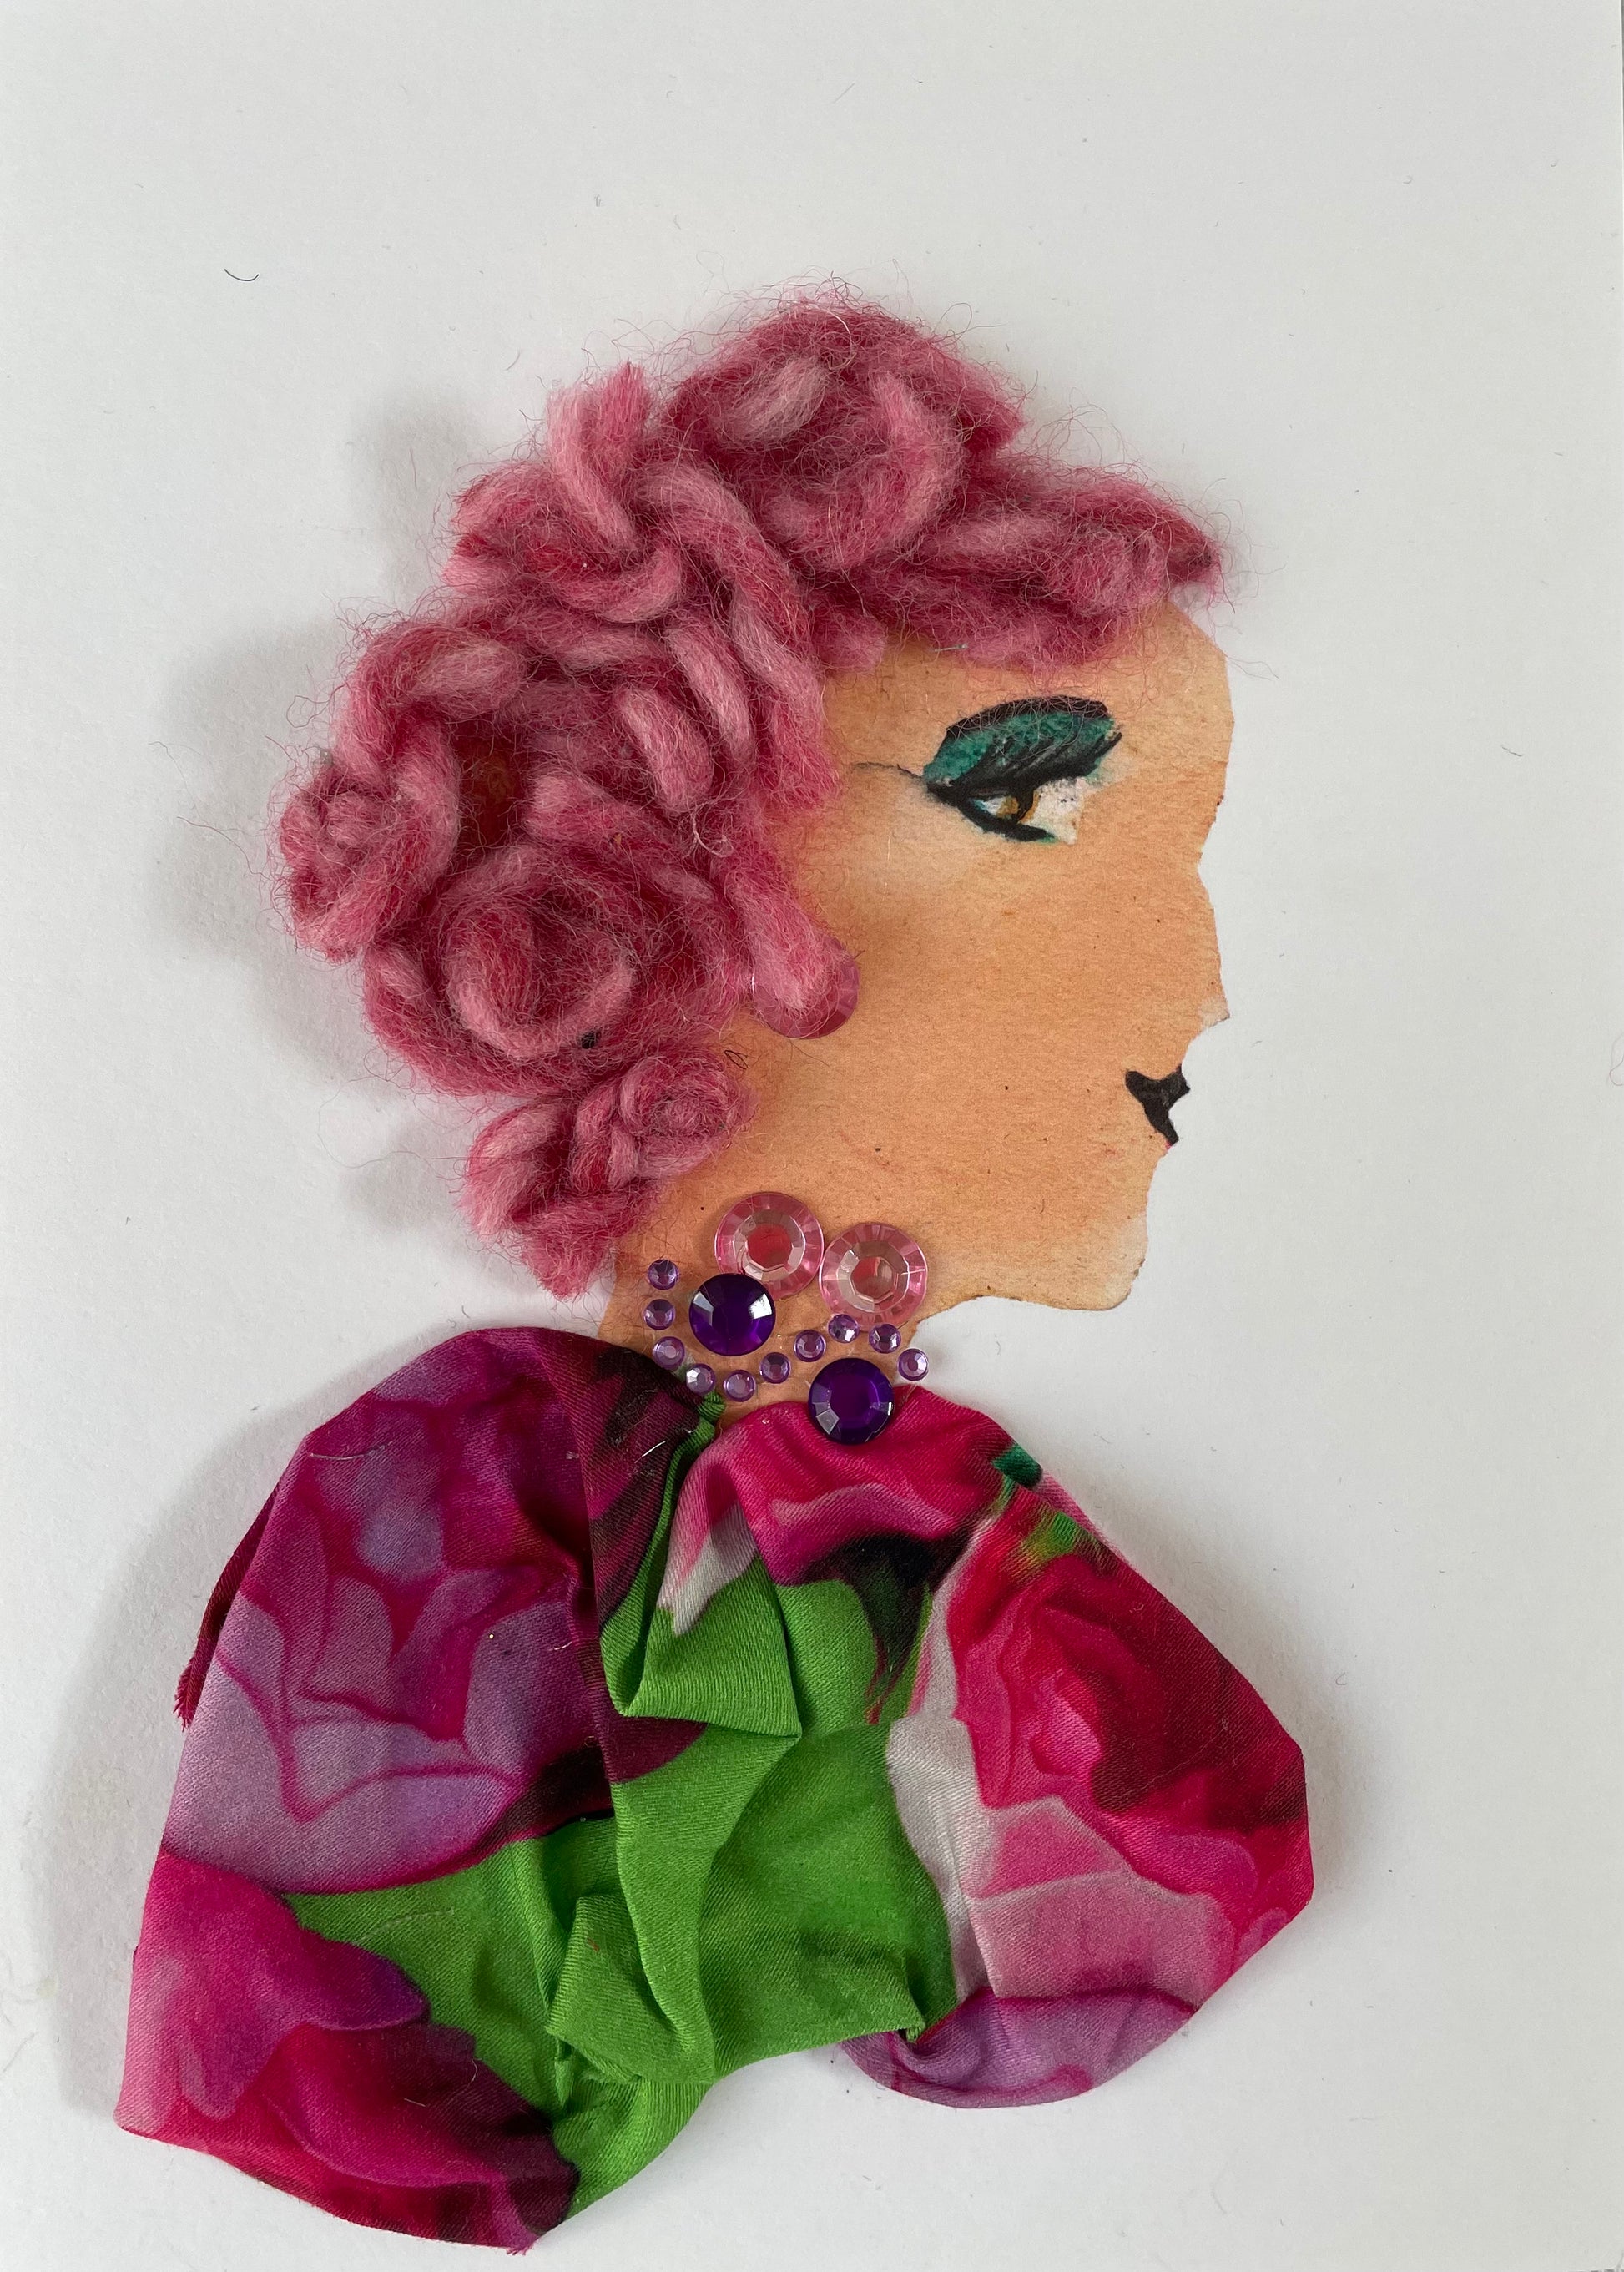 I designed this card of a woman named Plum Parks. She has a white skin tone and models a fuchsia and lime green silk blouse, accessorized with a necklace of pink and dark purple gems. Her dark pink curly hair further emphasizes her preference for the hue.